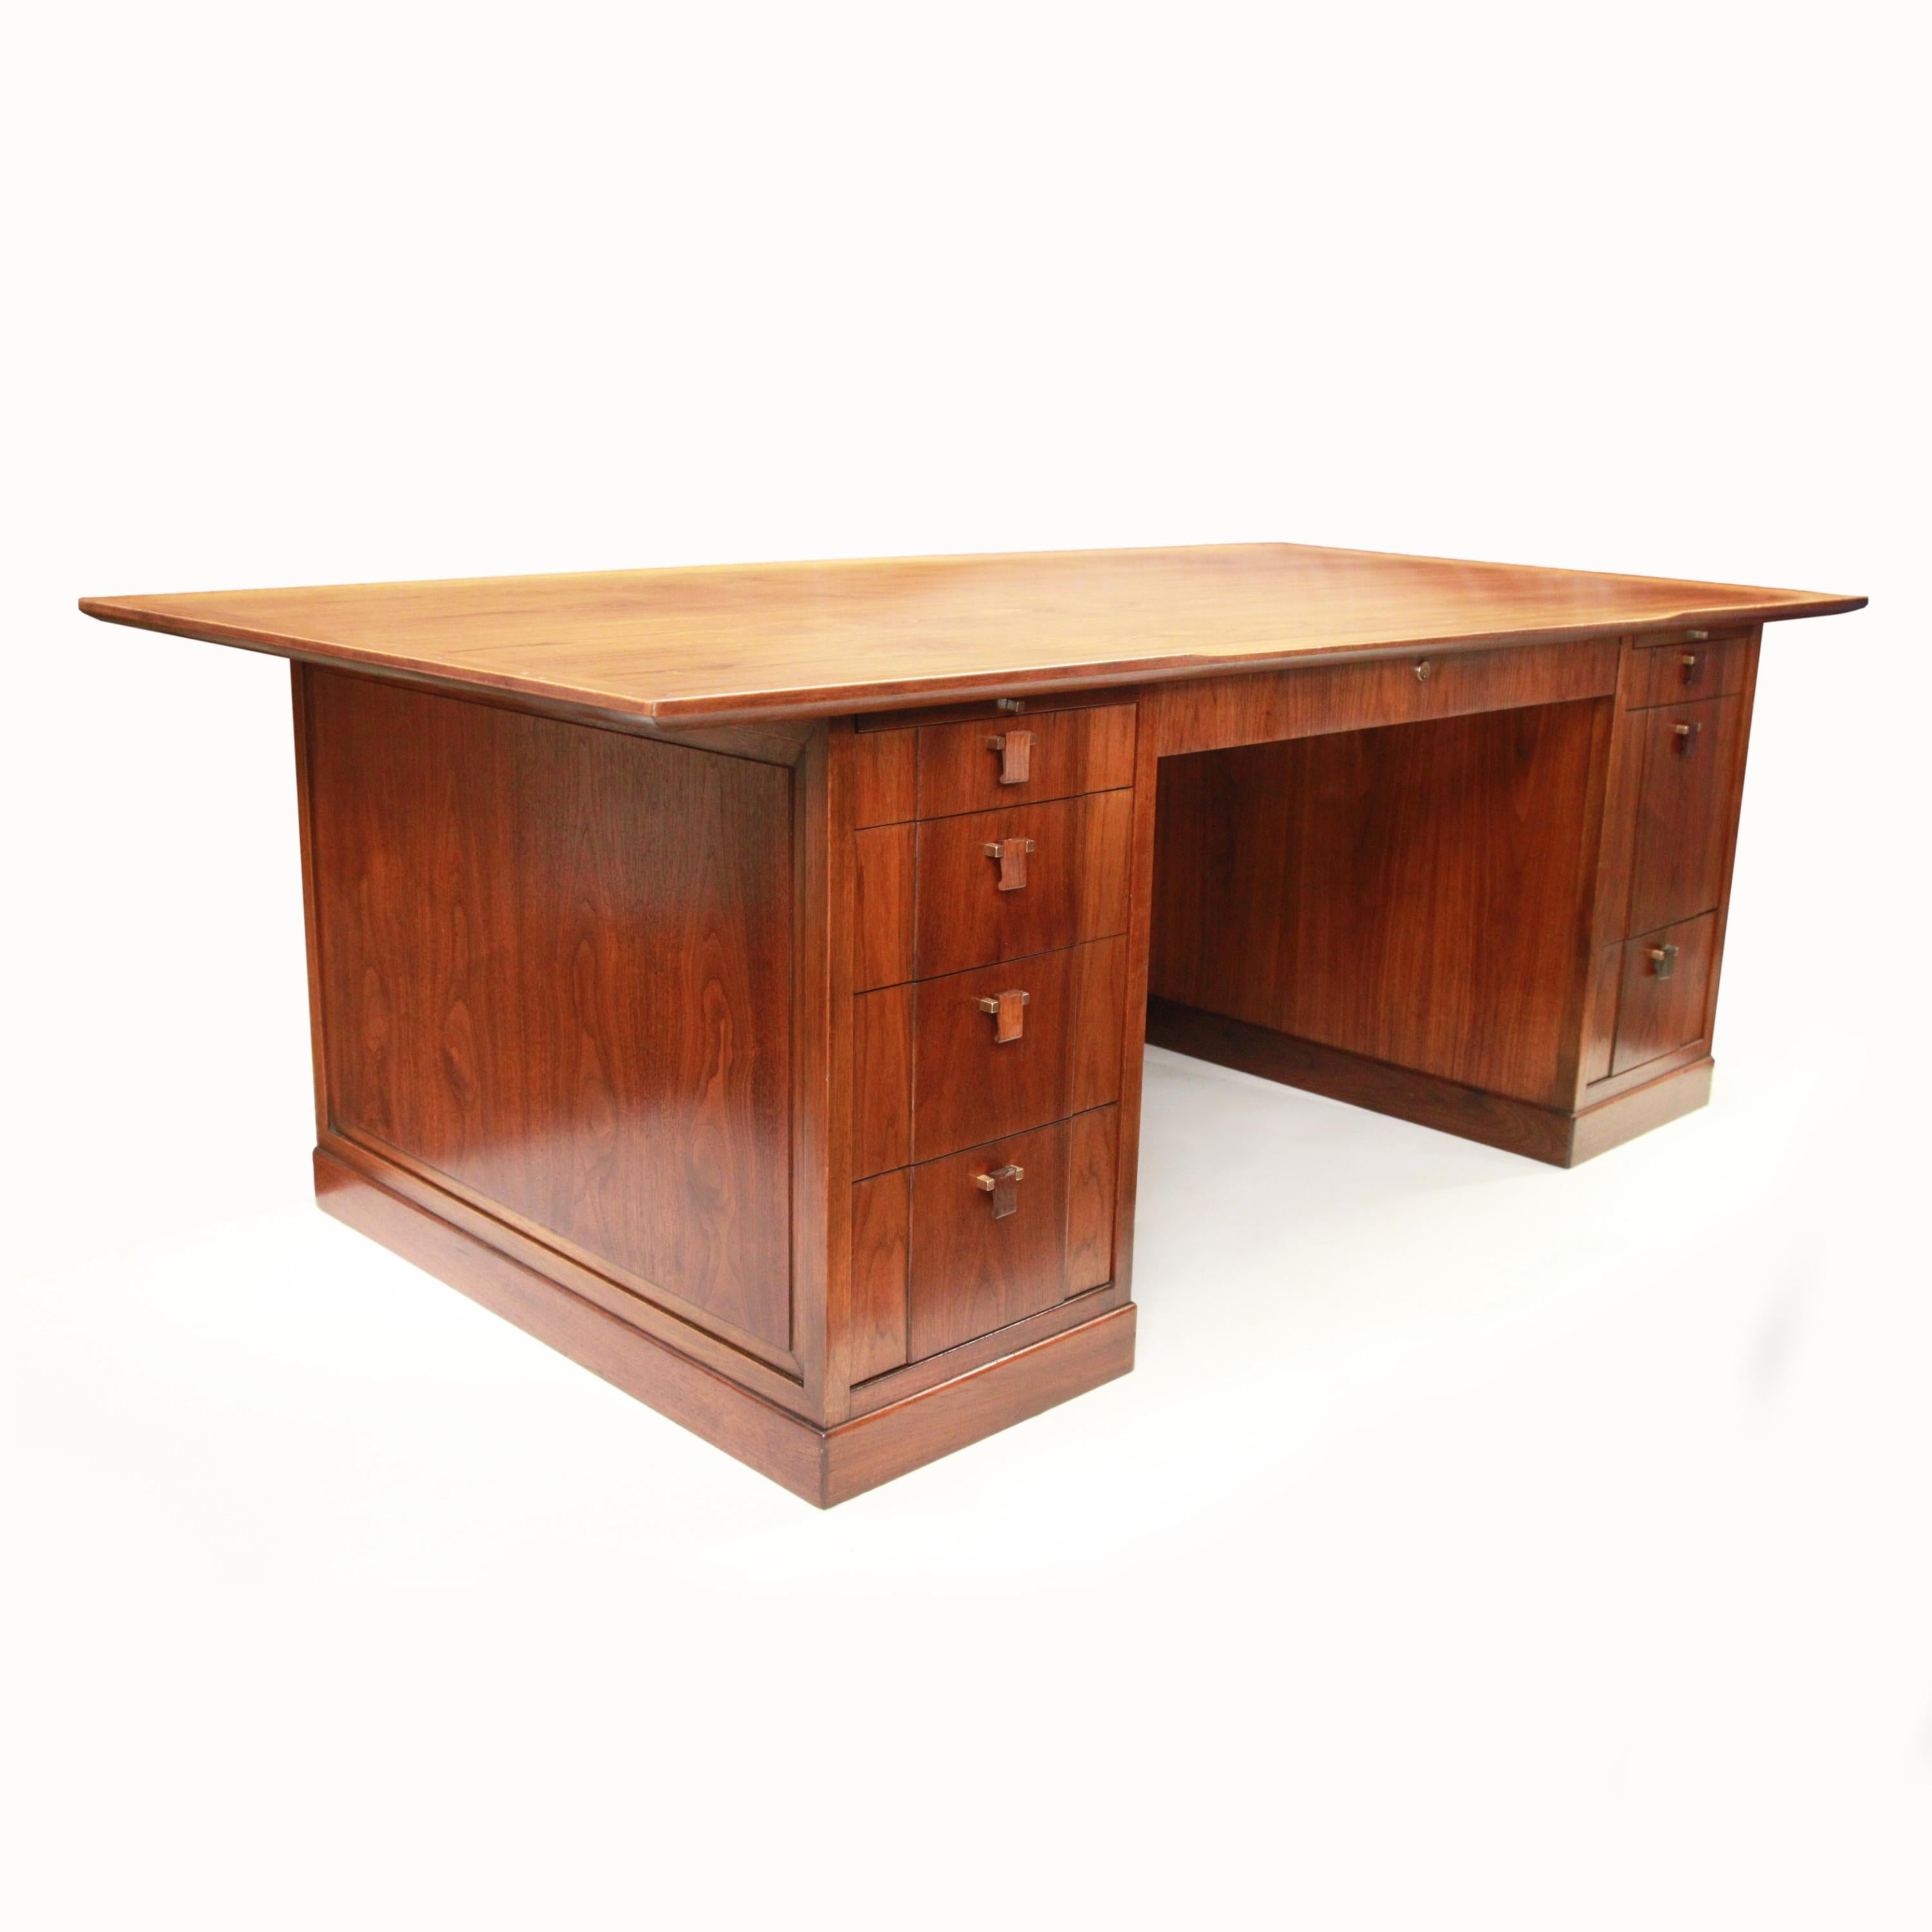 Grand style and grand scale combine in this wonderful executive desk by Edward Wormley for Dunbar. Desk features walnut construction, brass and mahogany pulls, and the renowned Dunbar build-quality. While the first thing you notice is the imposing